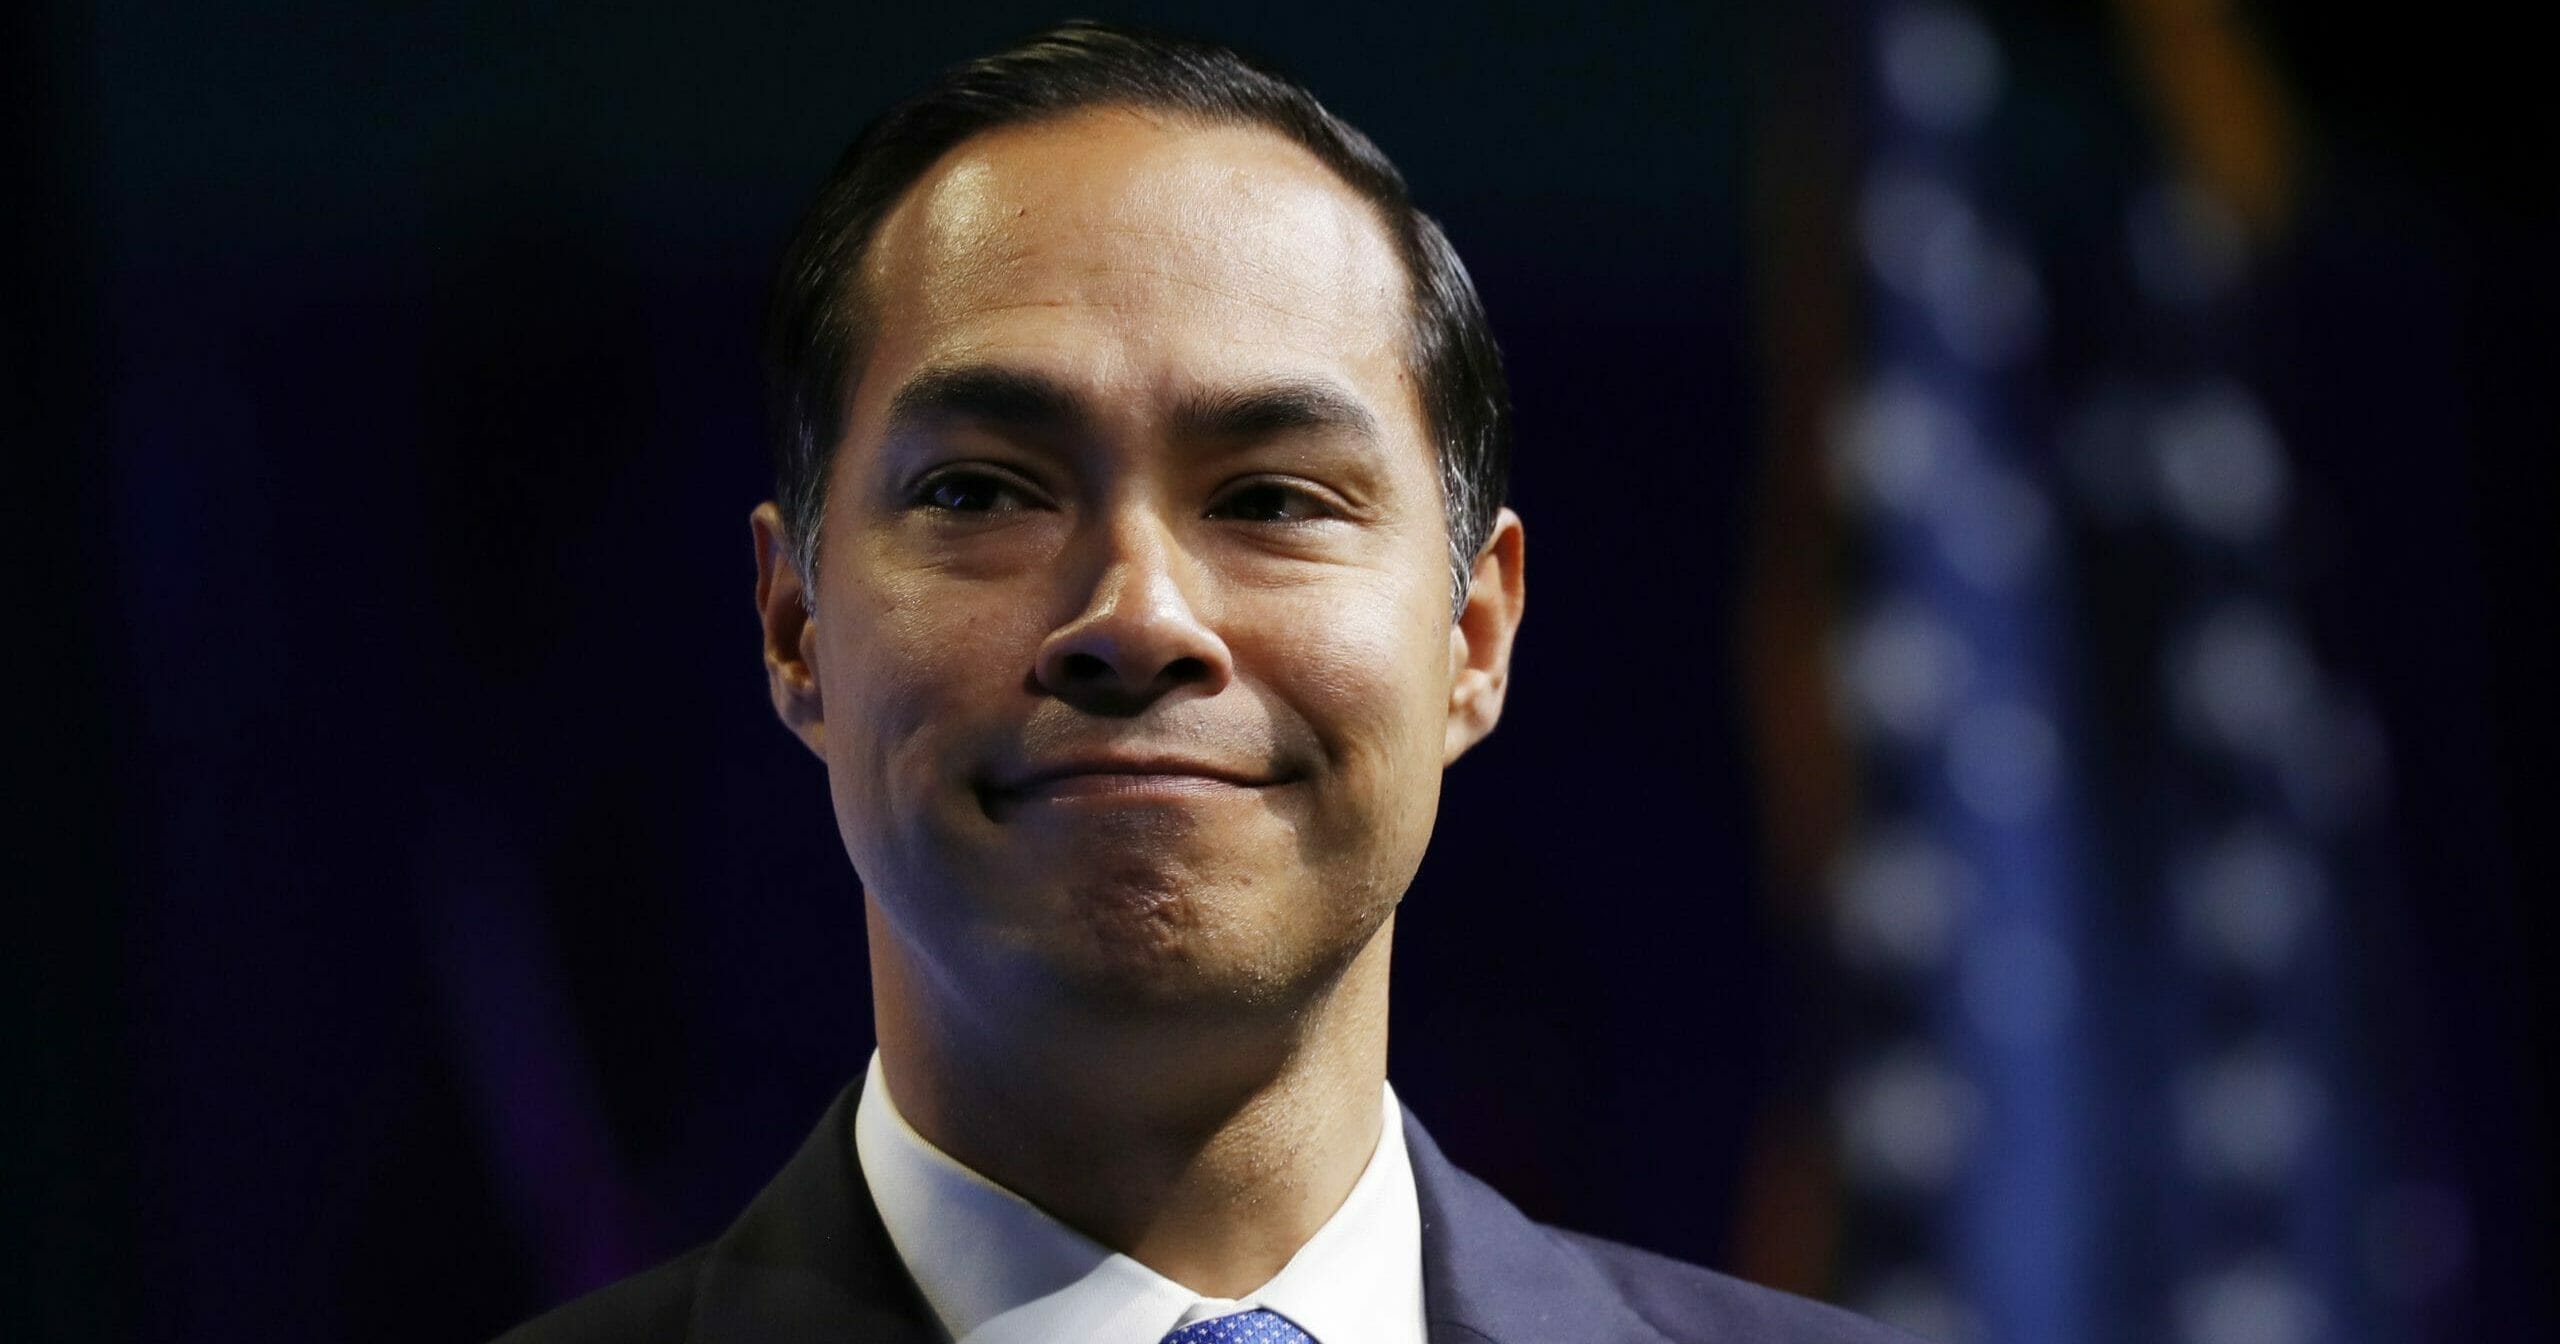 In this Oct. 28, 2019 file photo, former Housing and Urban Development Secretary and then-Democratic presidential candidate Julian Castro speaks at the J Street National Conference in Washington.